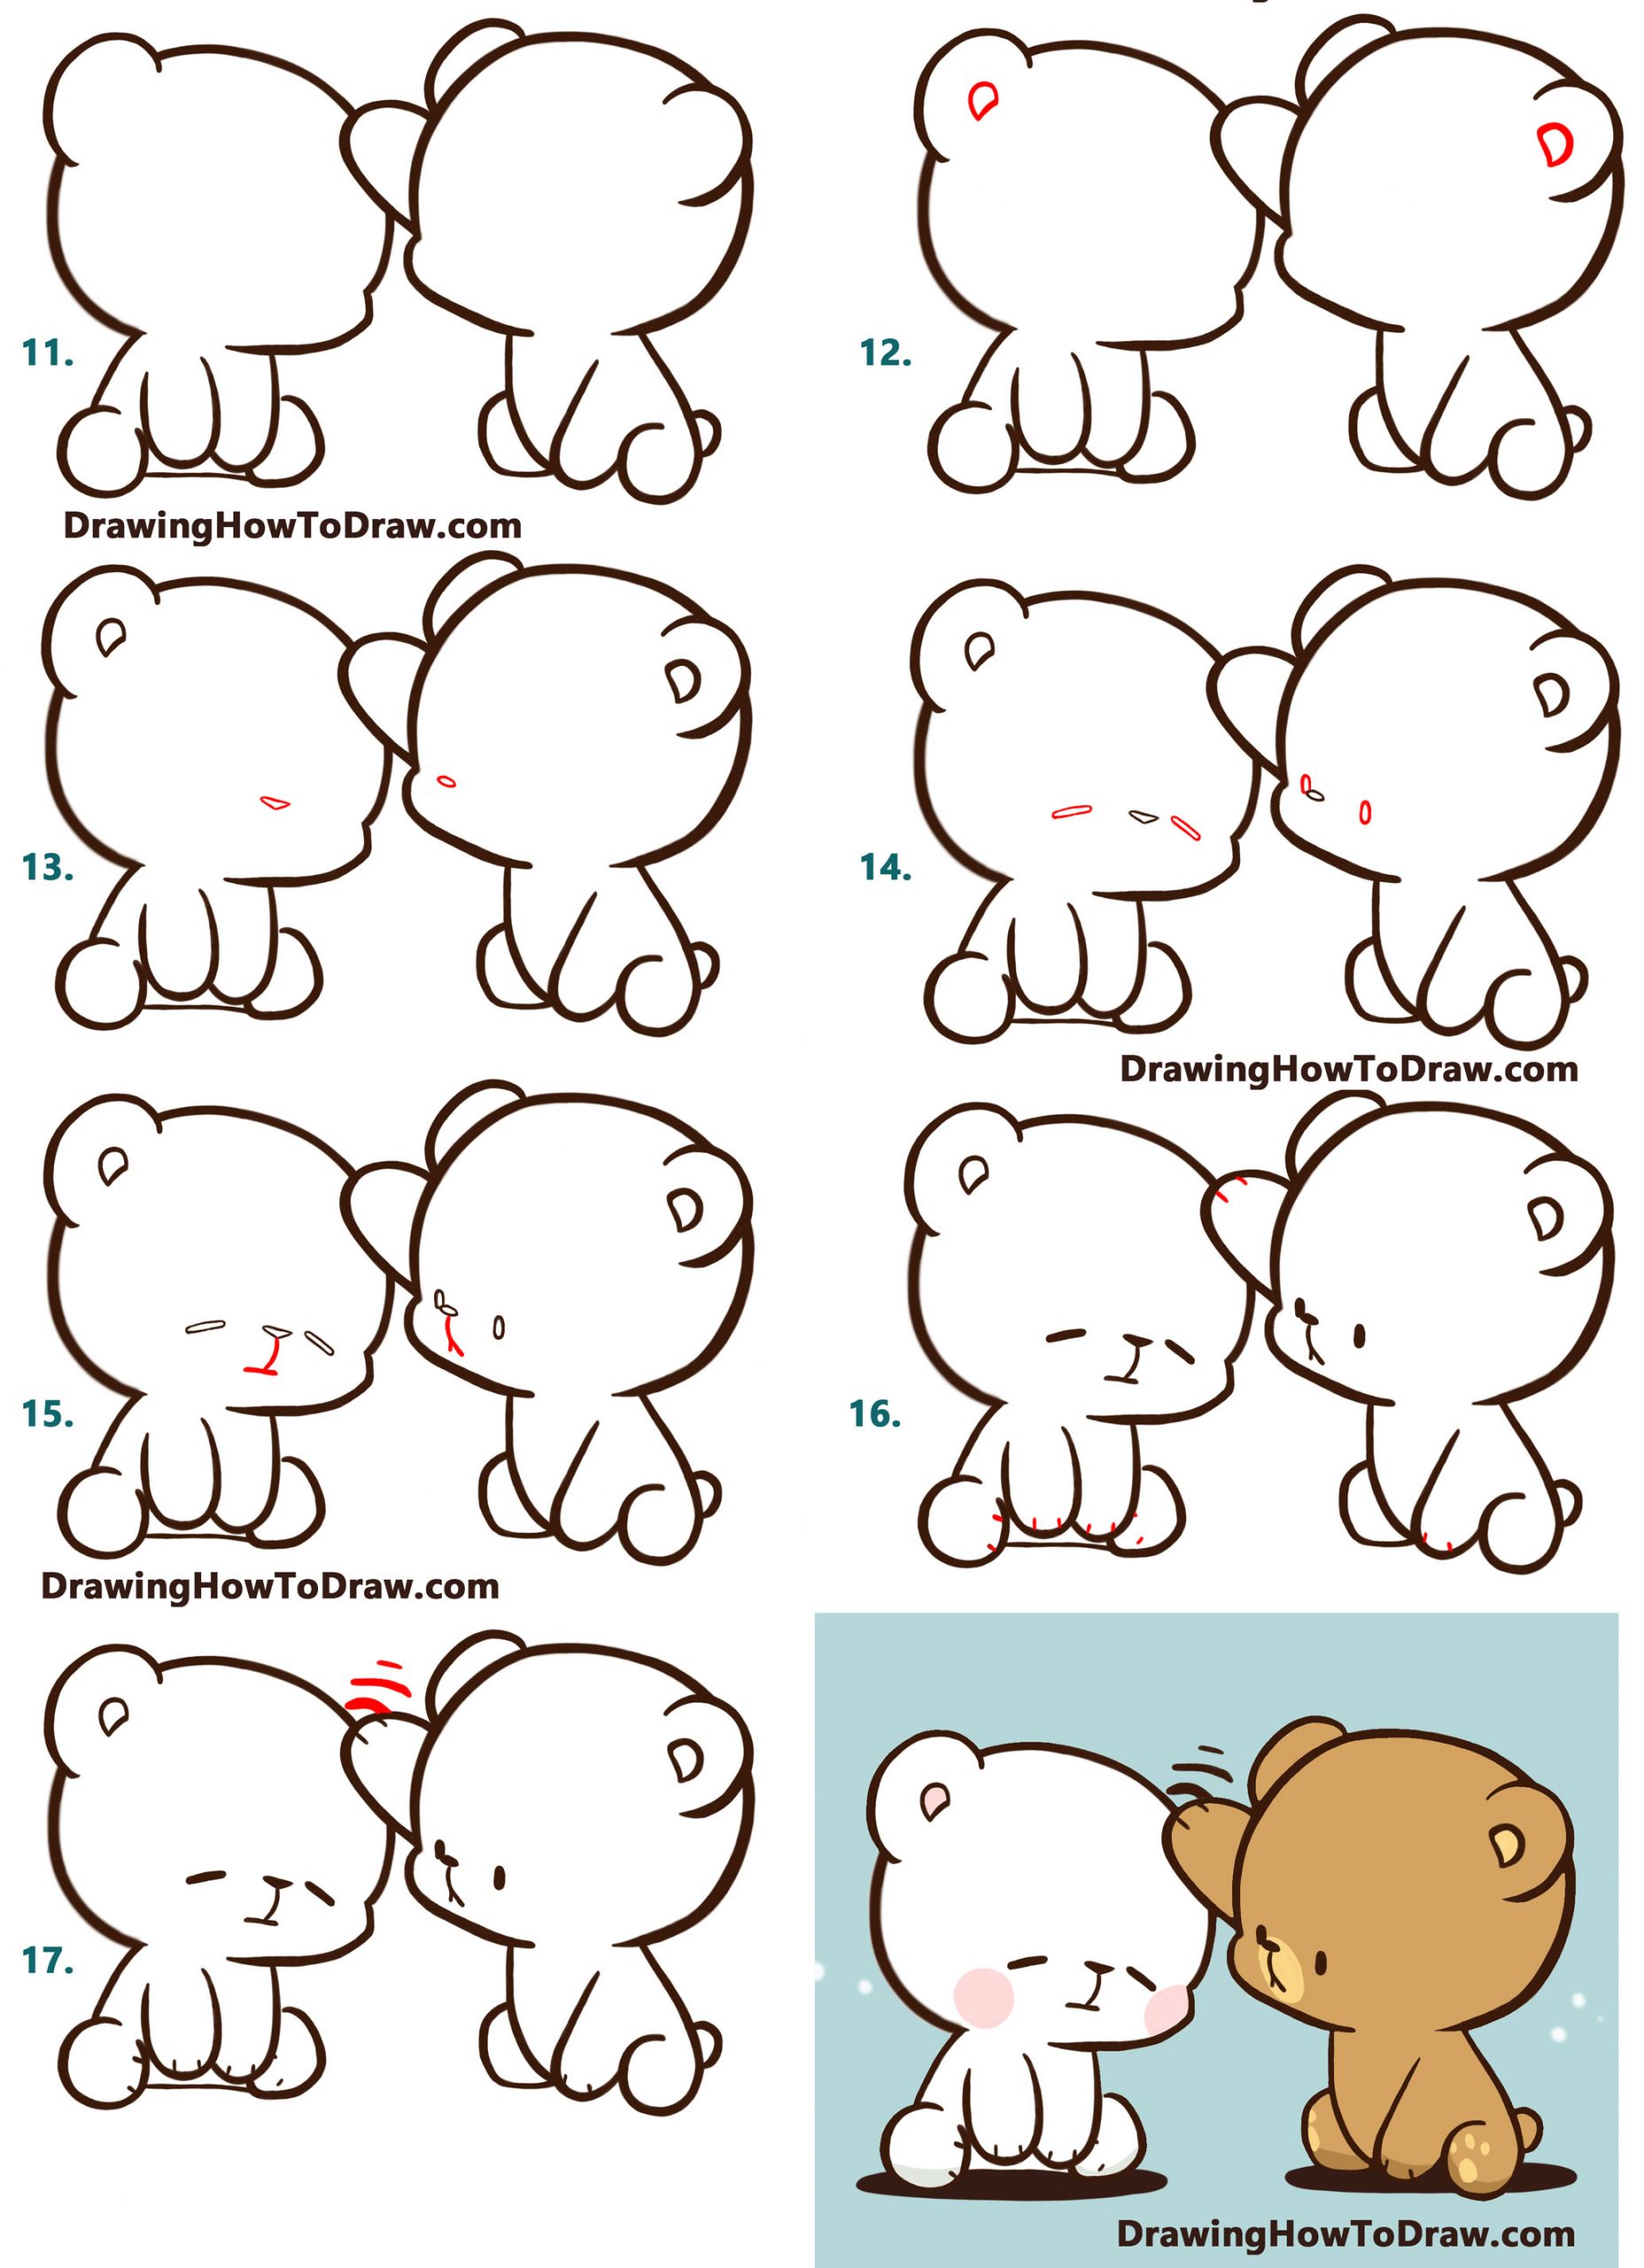 How to Draw The 2 Kawaii / Chibi Bears from Milk and Mocha - Easy Step by Step Drawing Tutorial